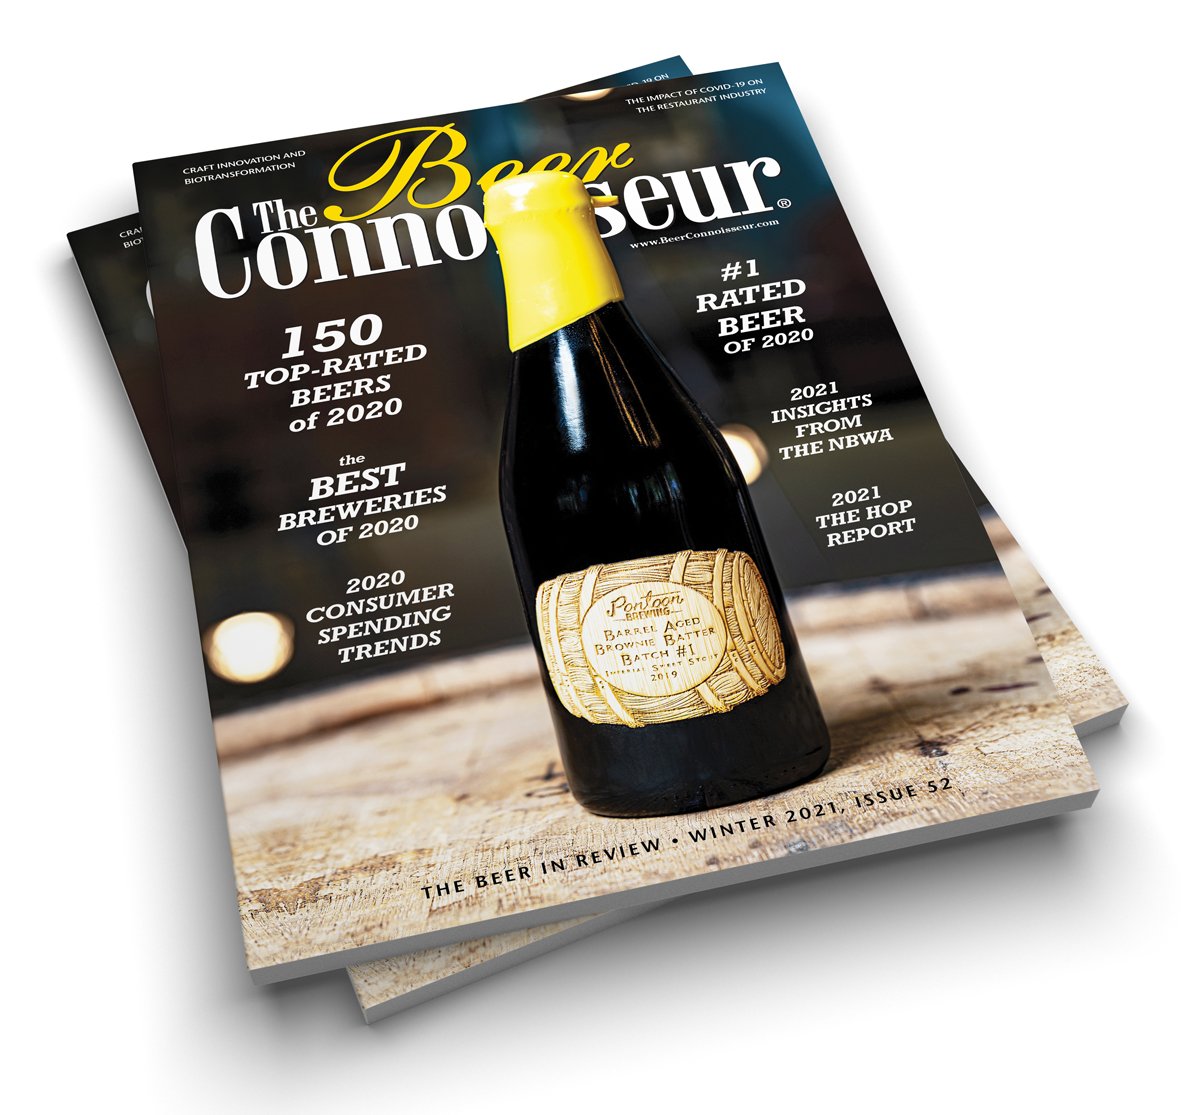 The Beer Connoissuer: WINTER 2021, ISSUE 52 (Back Edition)